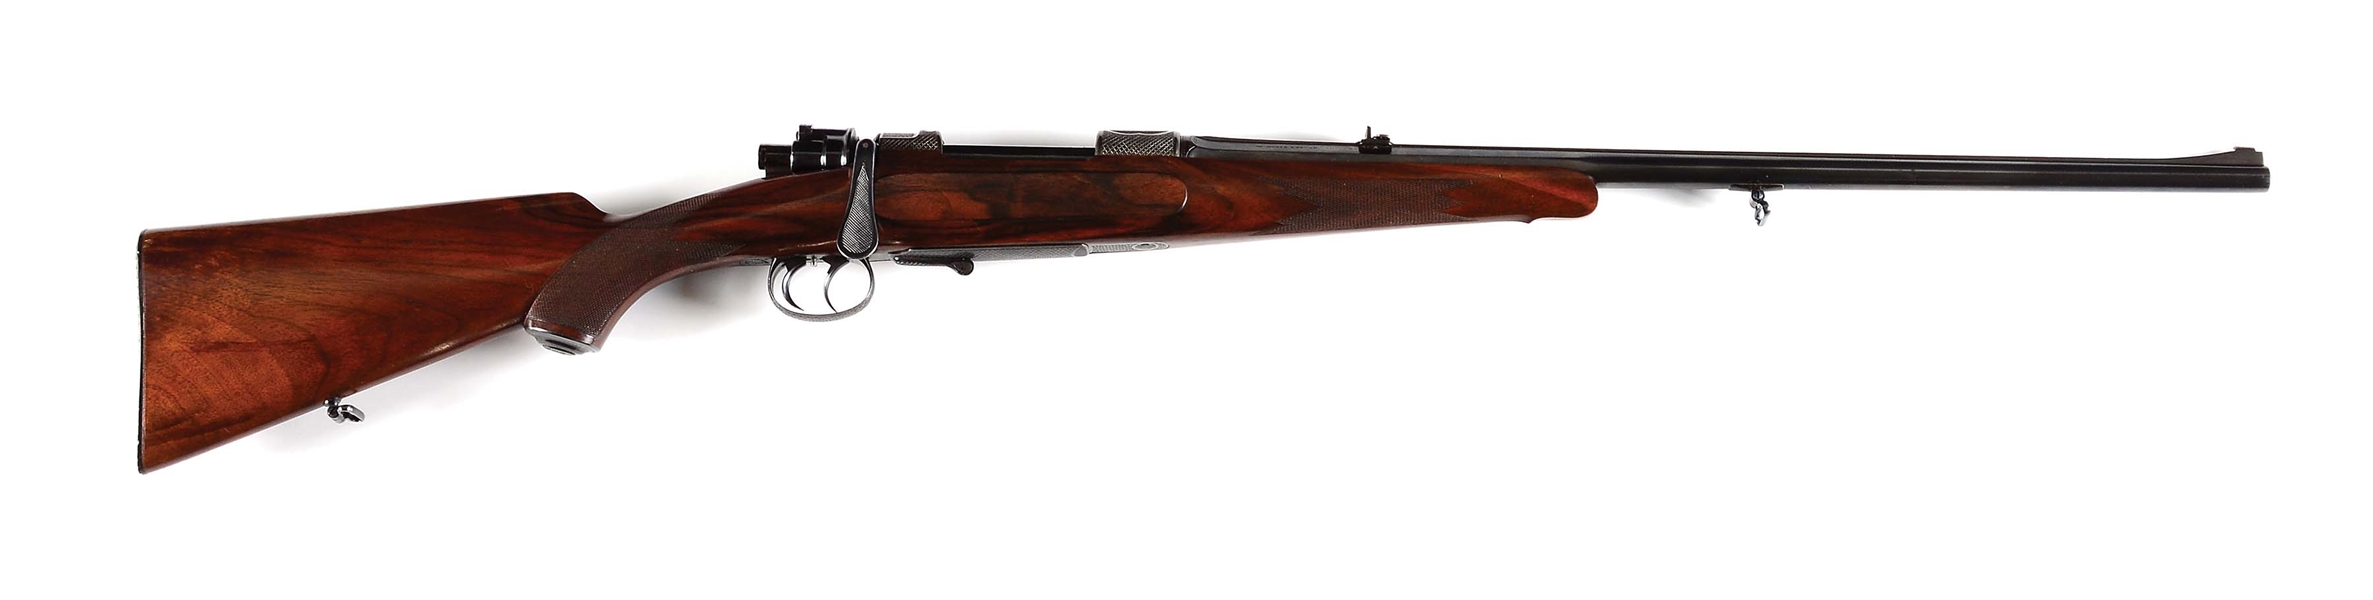 (C) SIMSON & CO. BOLT ACTION MAUSER SPORTING RIFLE IN 9X57.